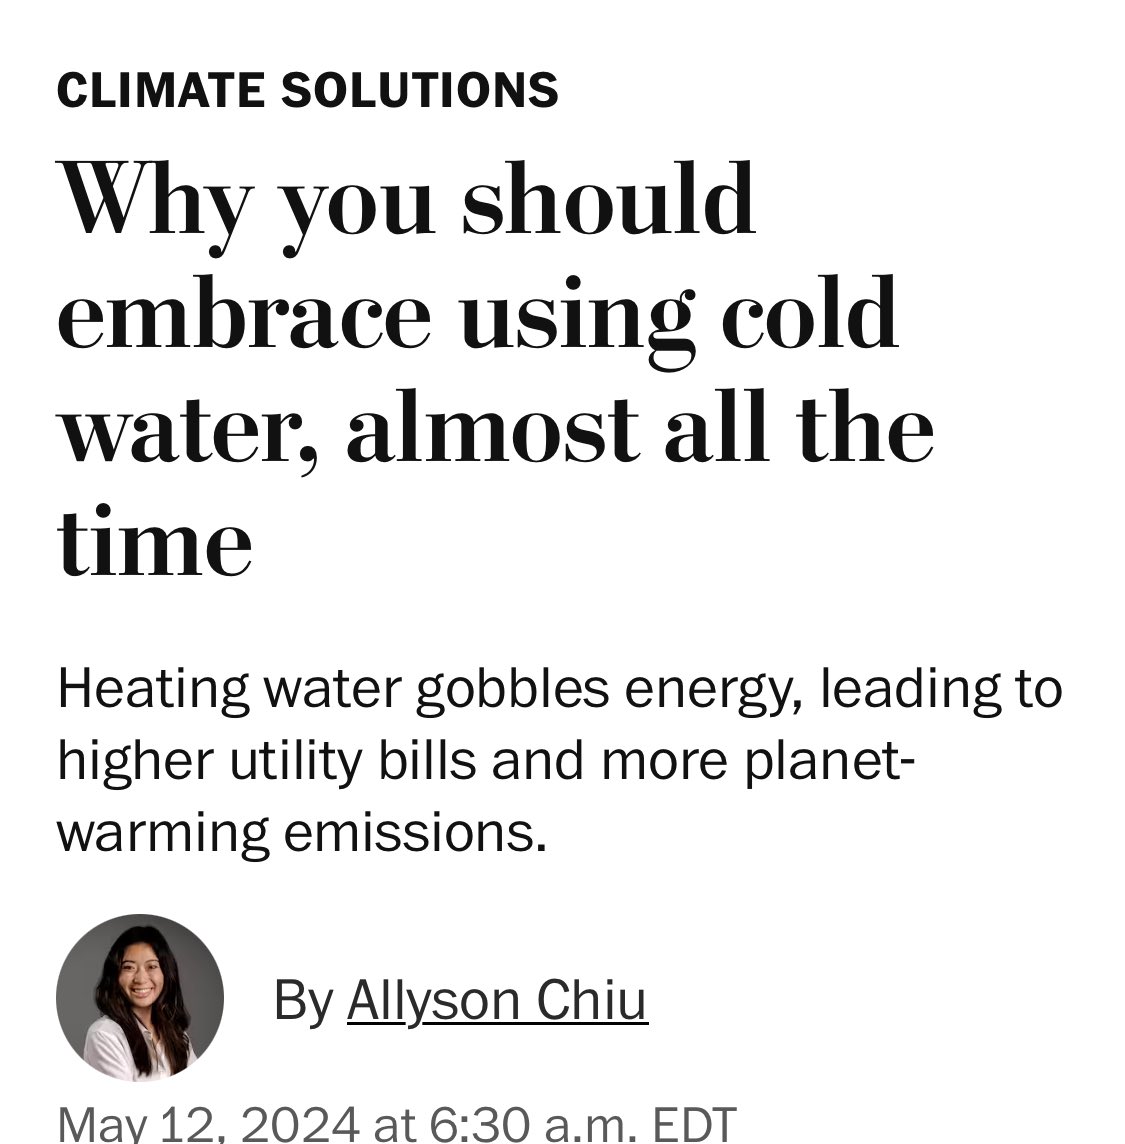 No. I will not use cold water all the time. I will build a future of abundance and fix the problems in the way of living a comfortable life - for myself, for everyone. This attitude is giving up. I will not give up.